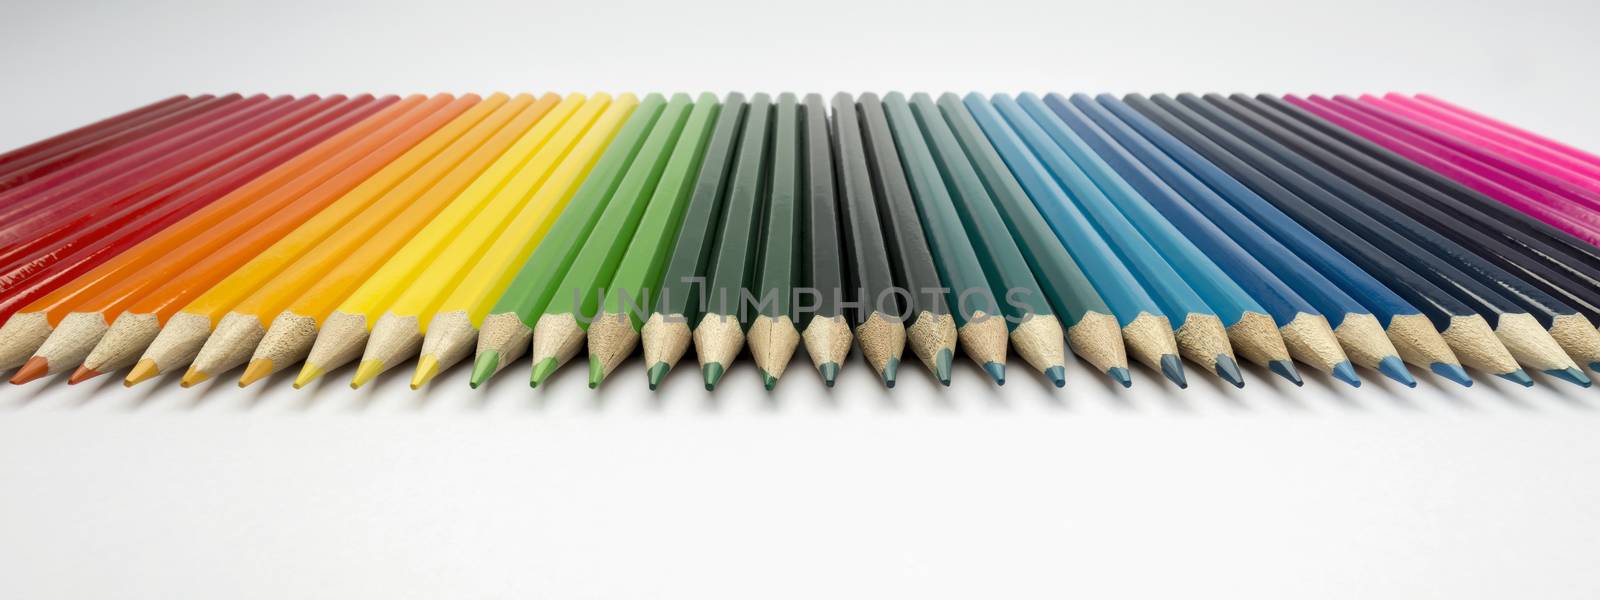 Crayons as background picture
 by Tofotografie